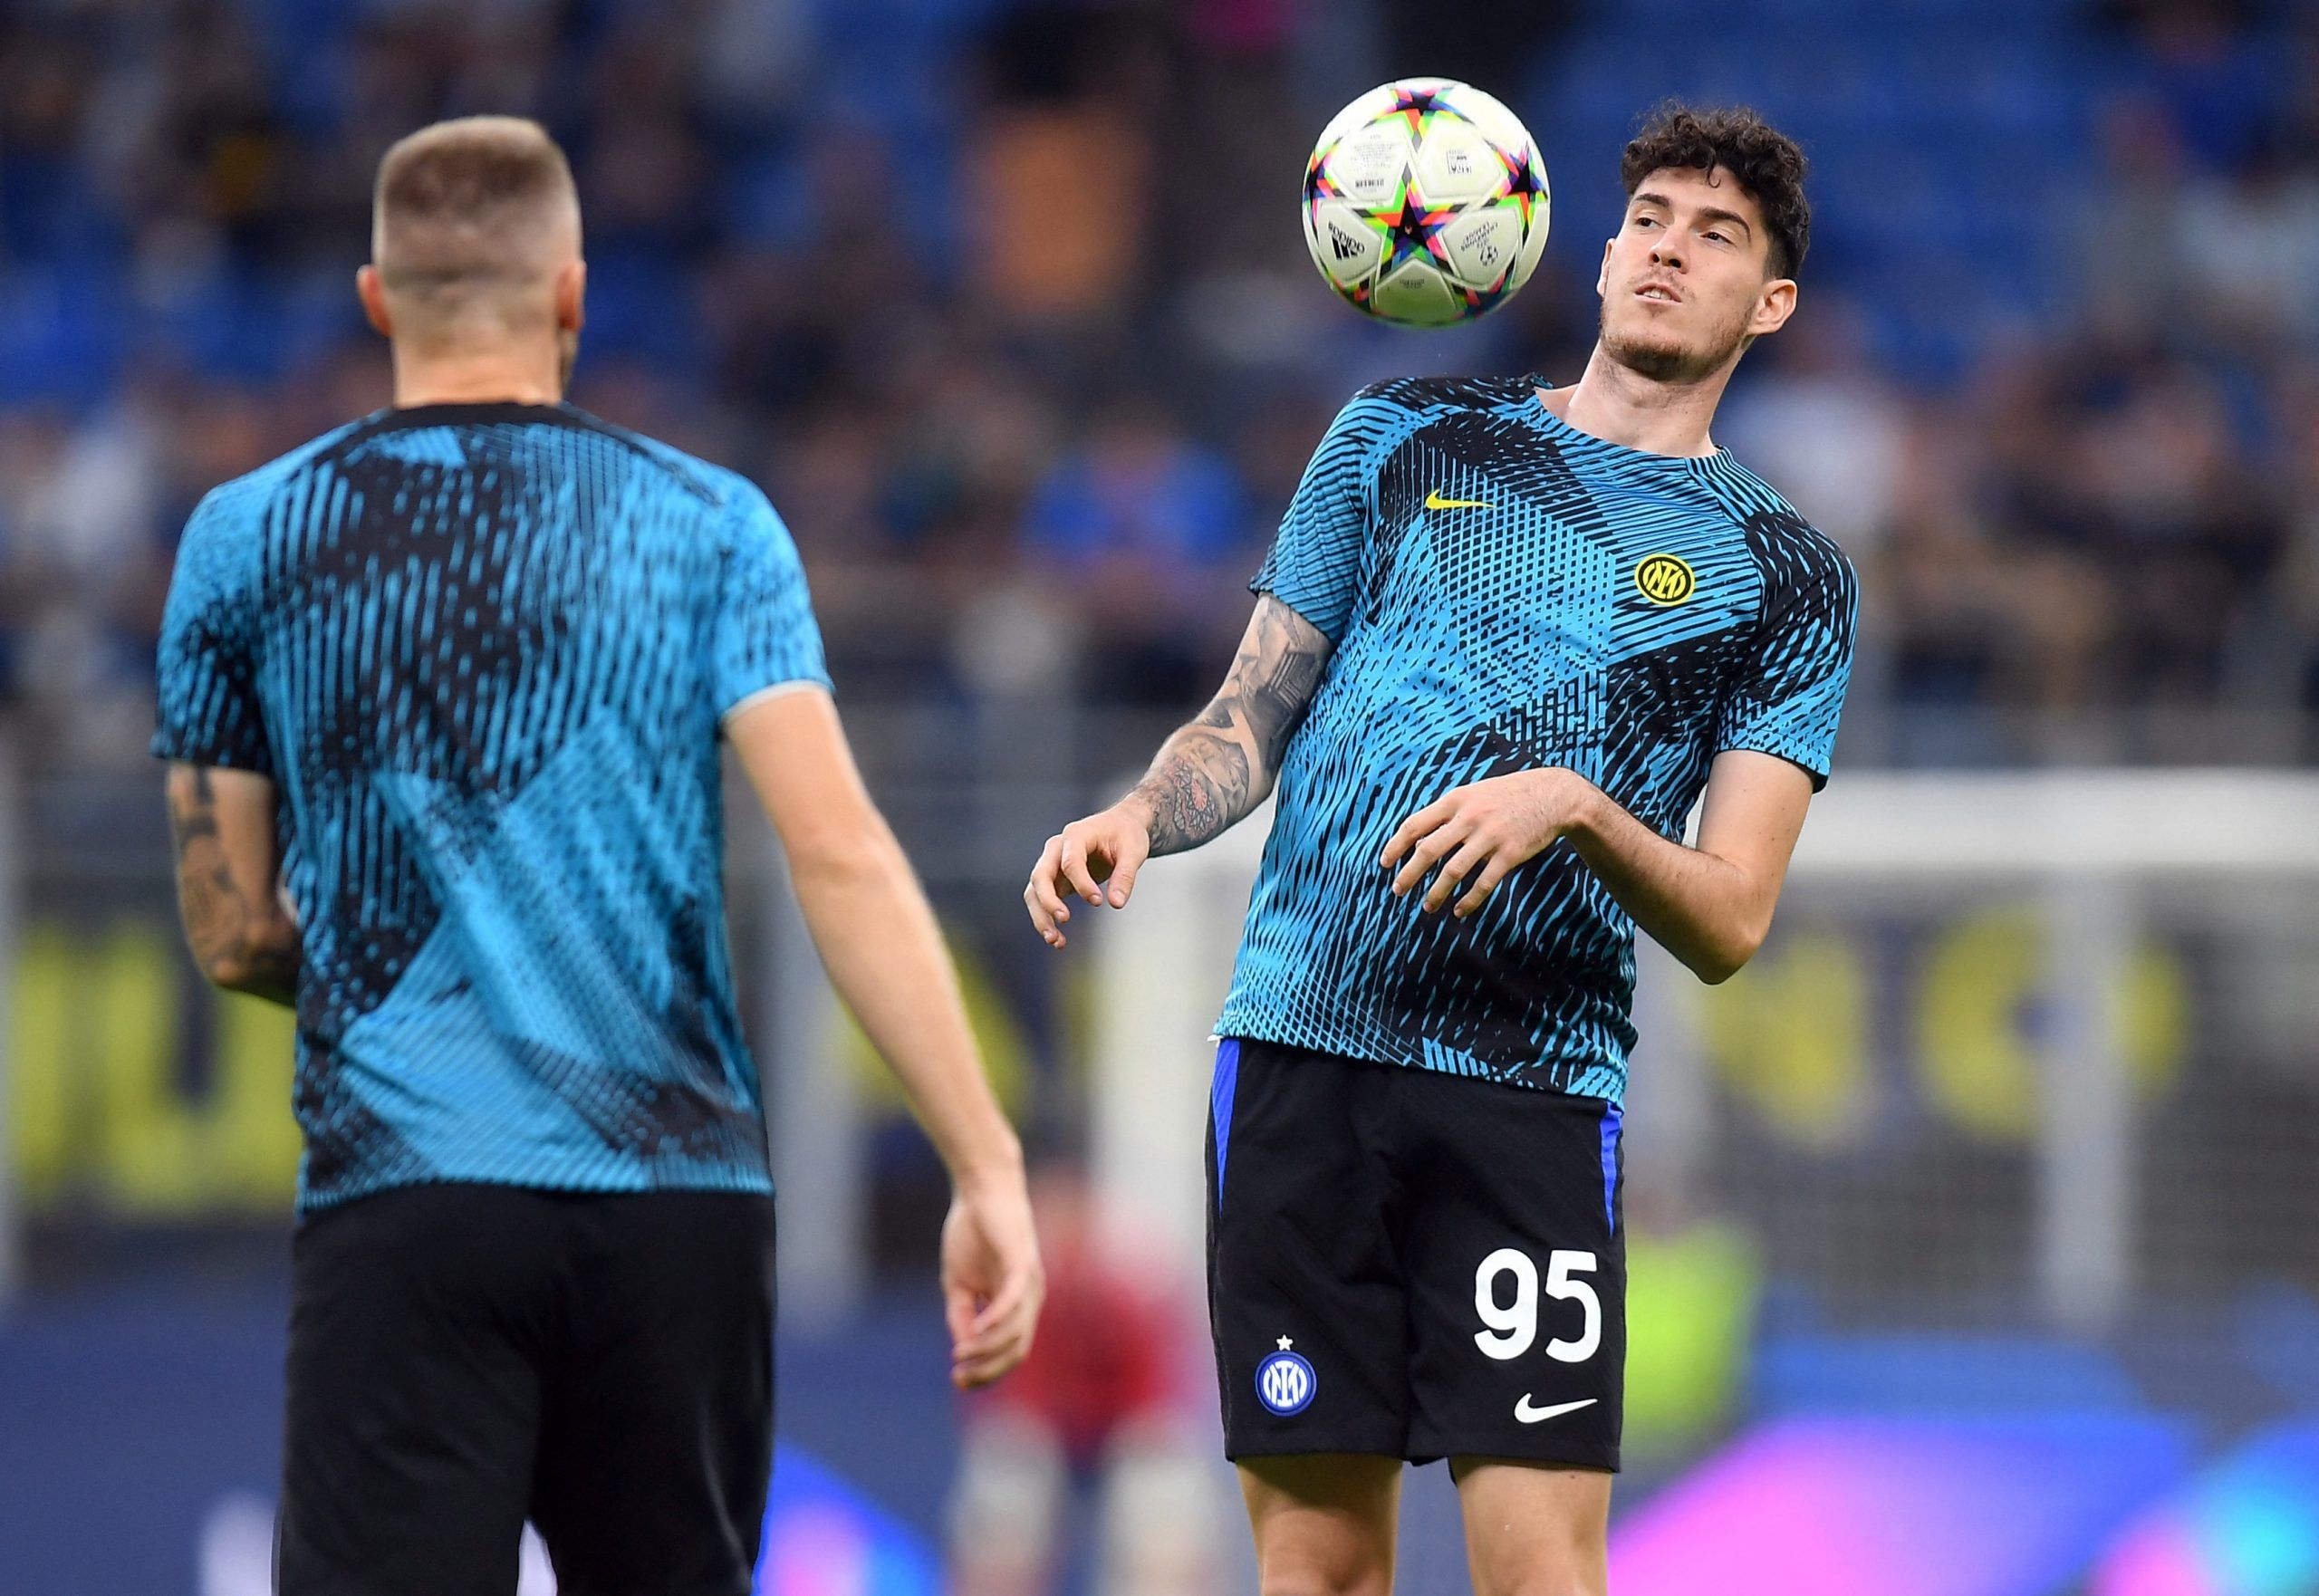 Inter Milan's Alessandro Bastoni during the warm up before the match